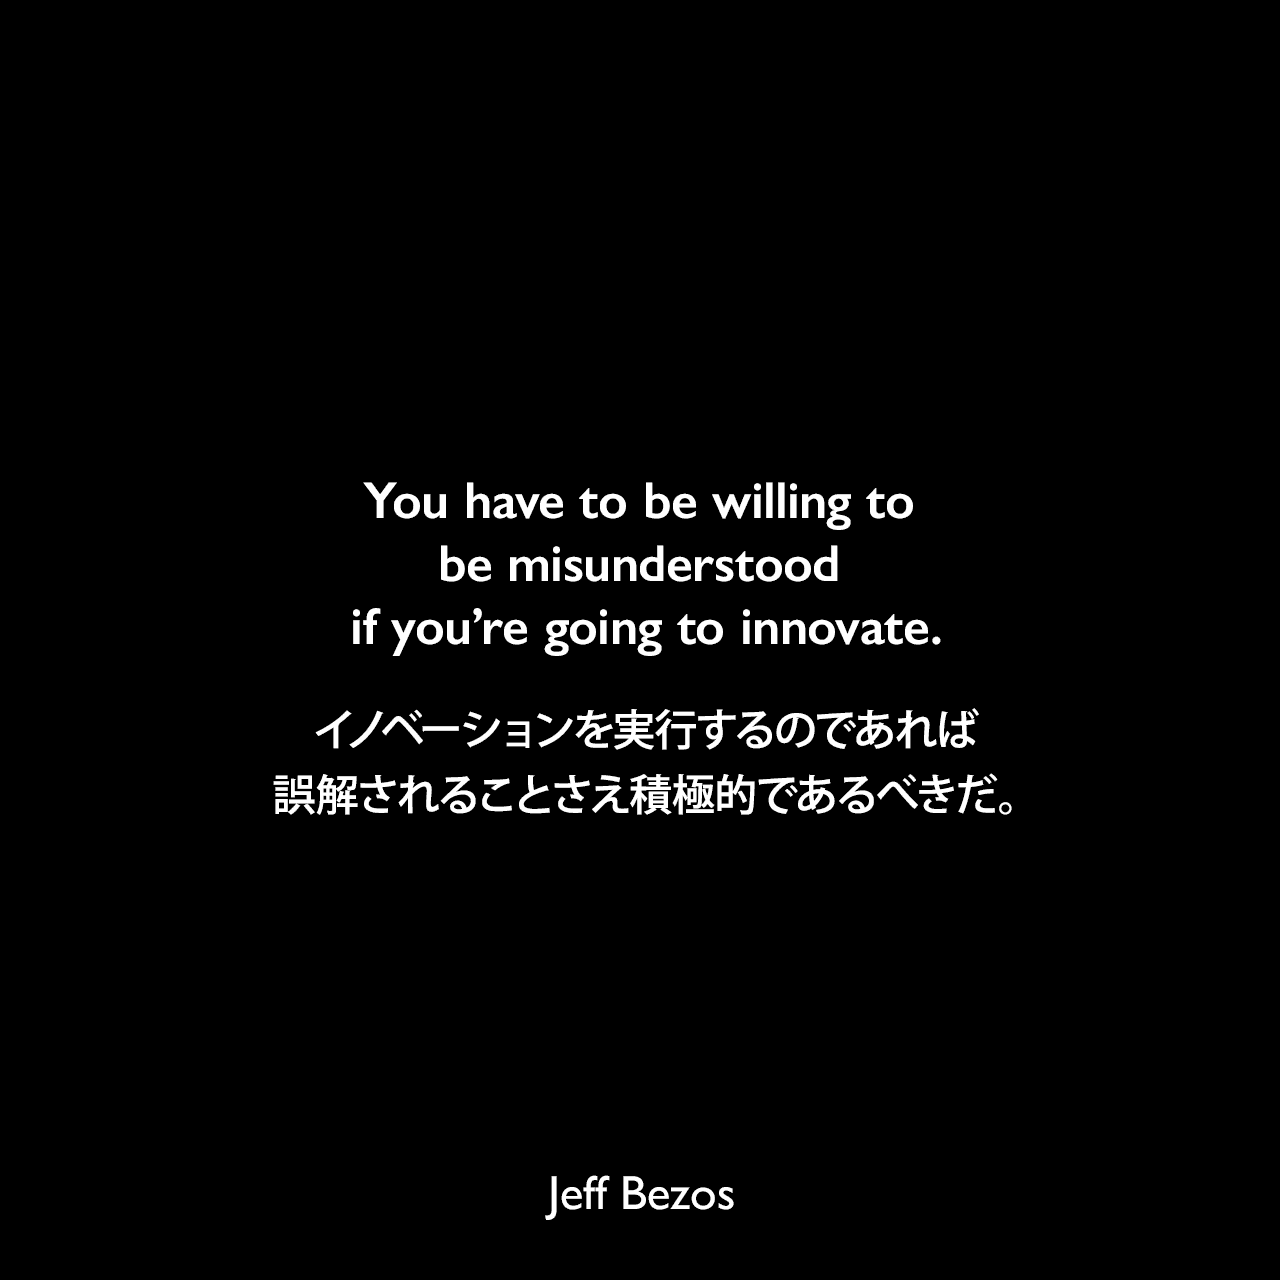 You have to be willing to be misunderstood if you’re going to innovate.イノベーションを実行するのであれば、誤解されることさえ積極的であるべきだ。Jeff Bezos